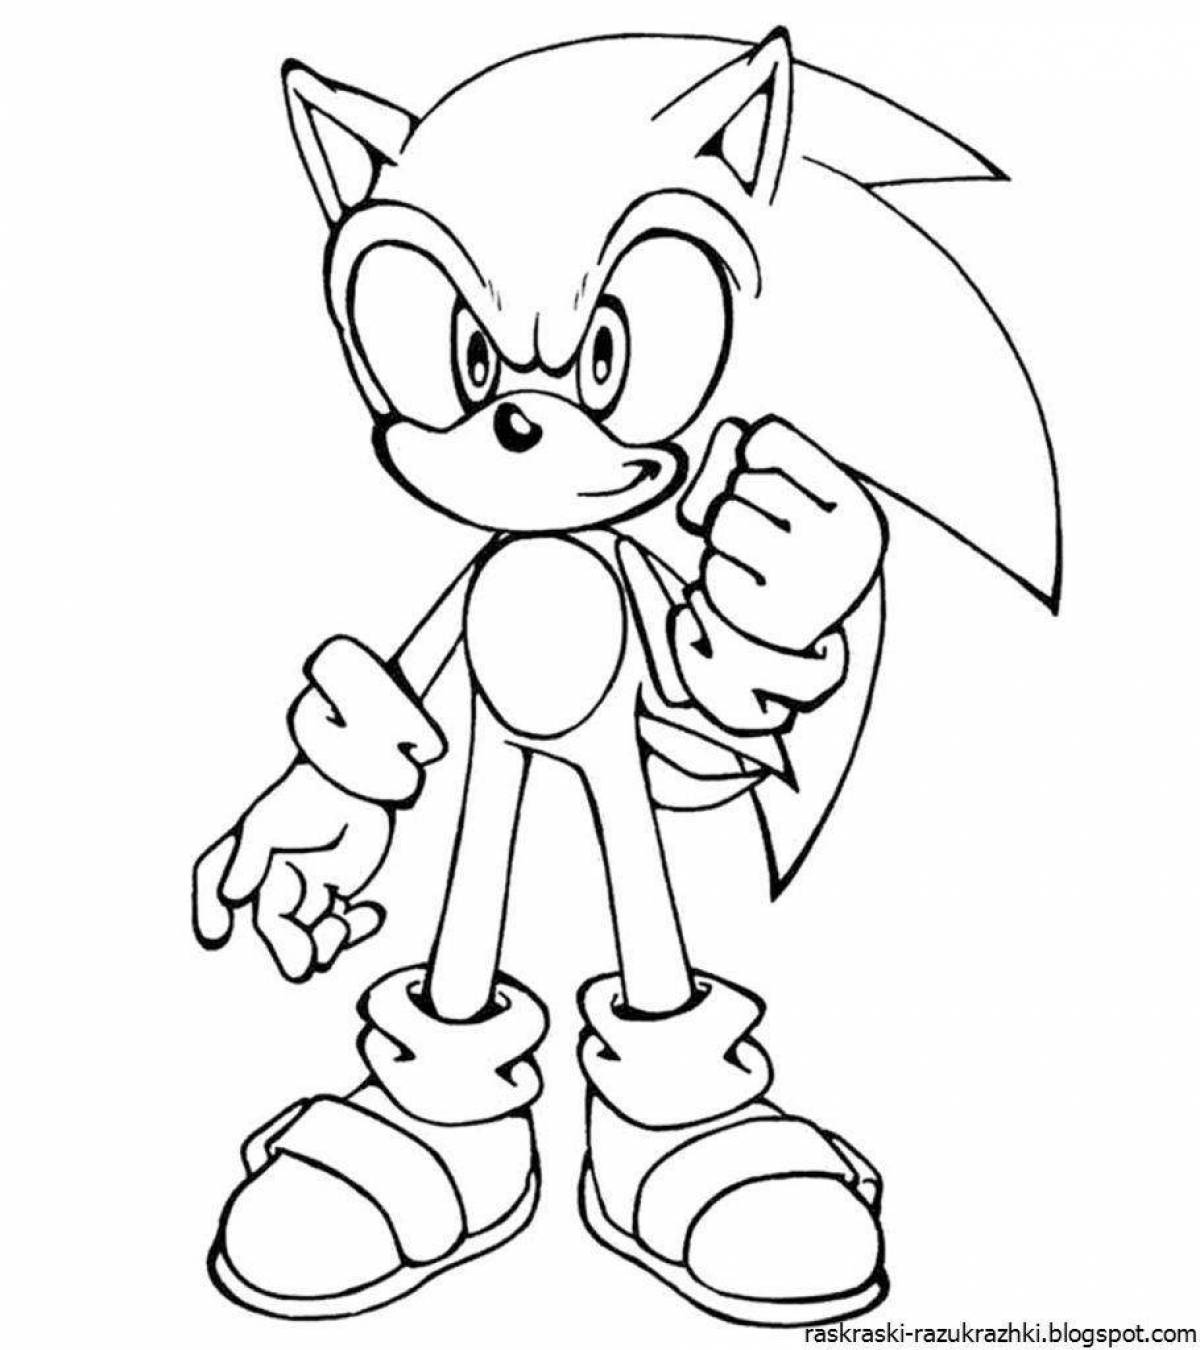 Sonic classic inviting coloring page